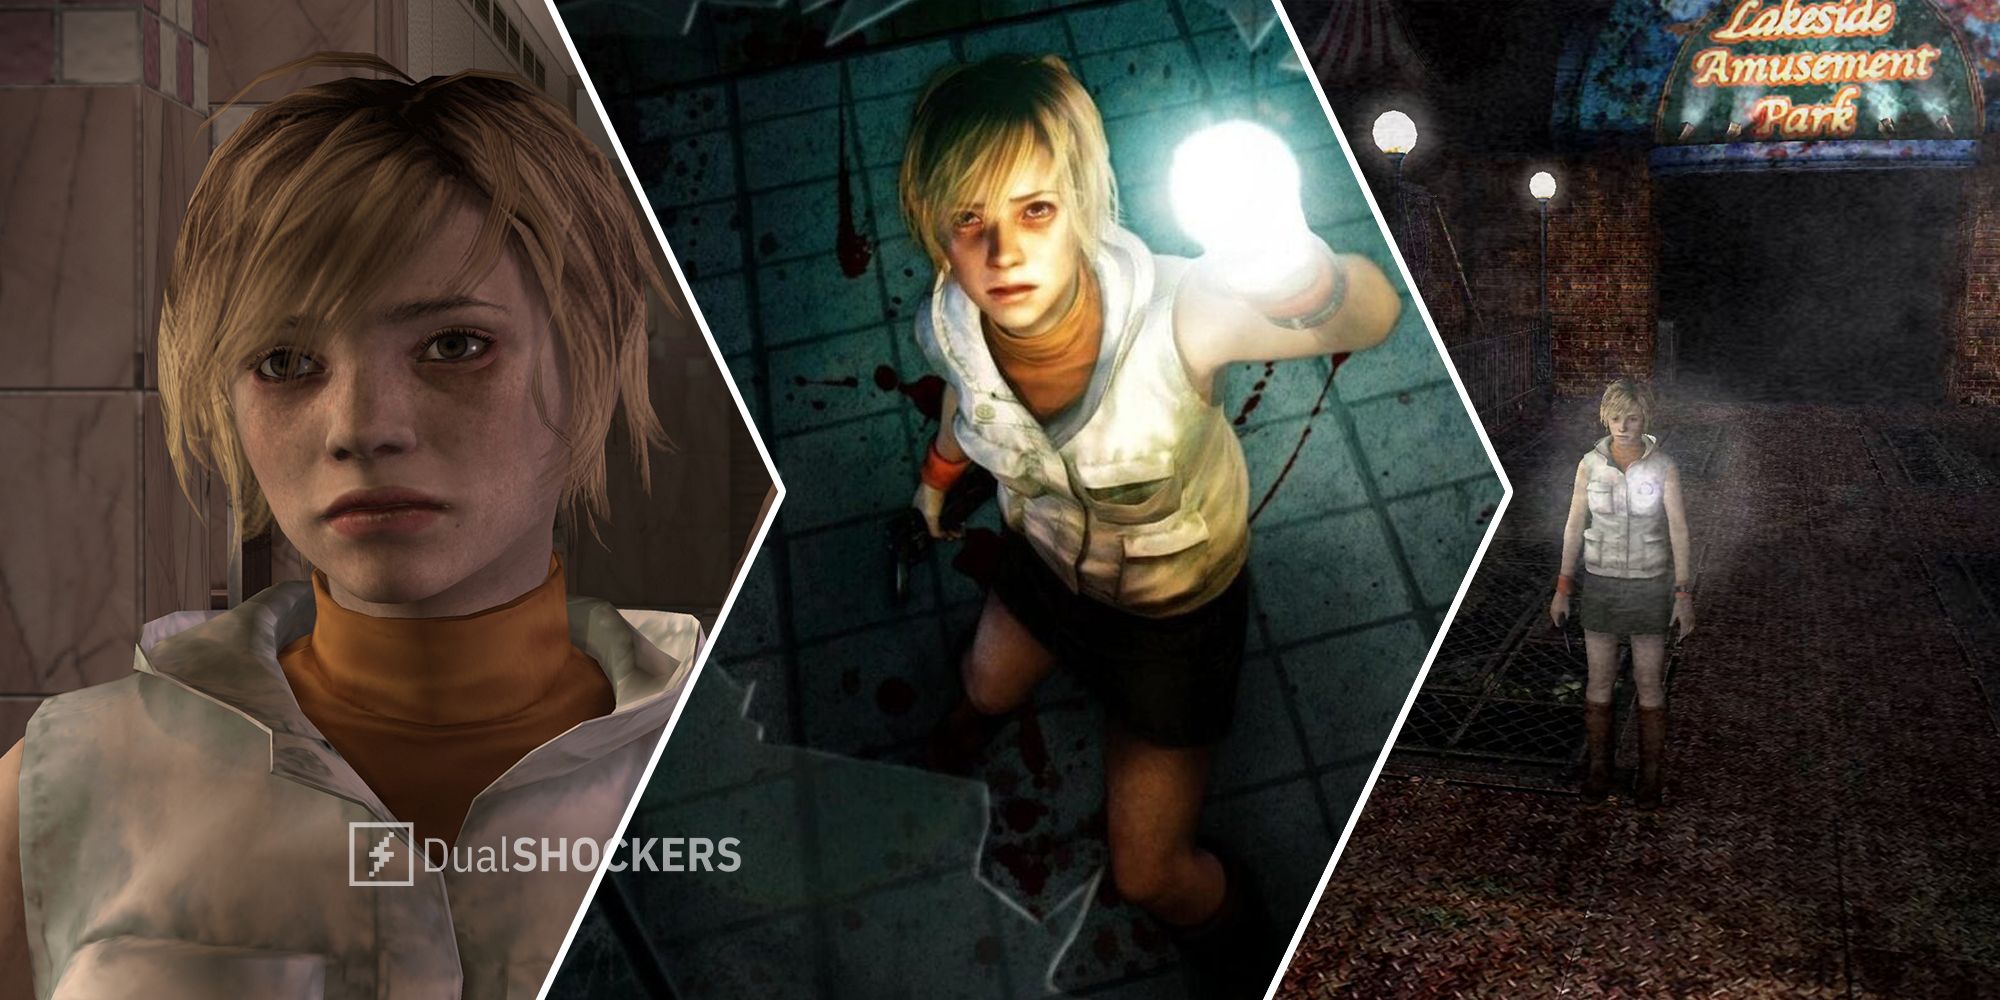 The Silent Hill 2 Remake Will Never Be Silent Hill 2, and That Is Fine